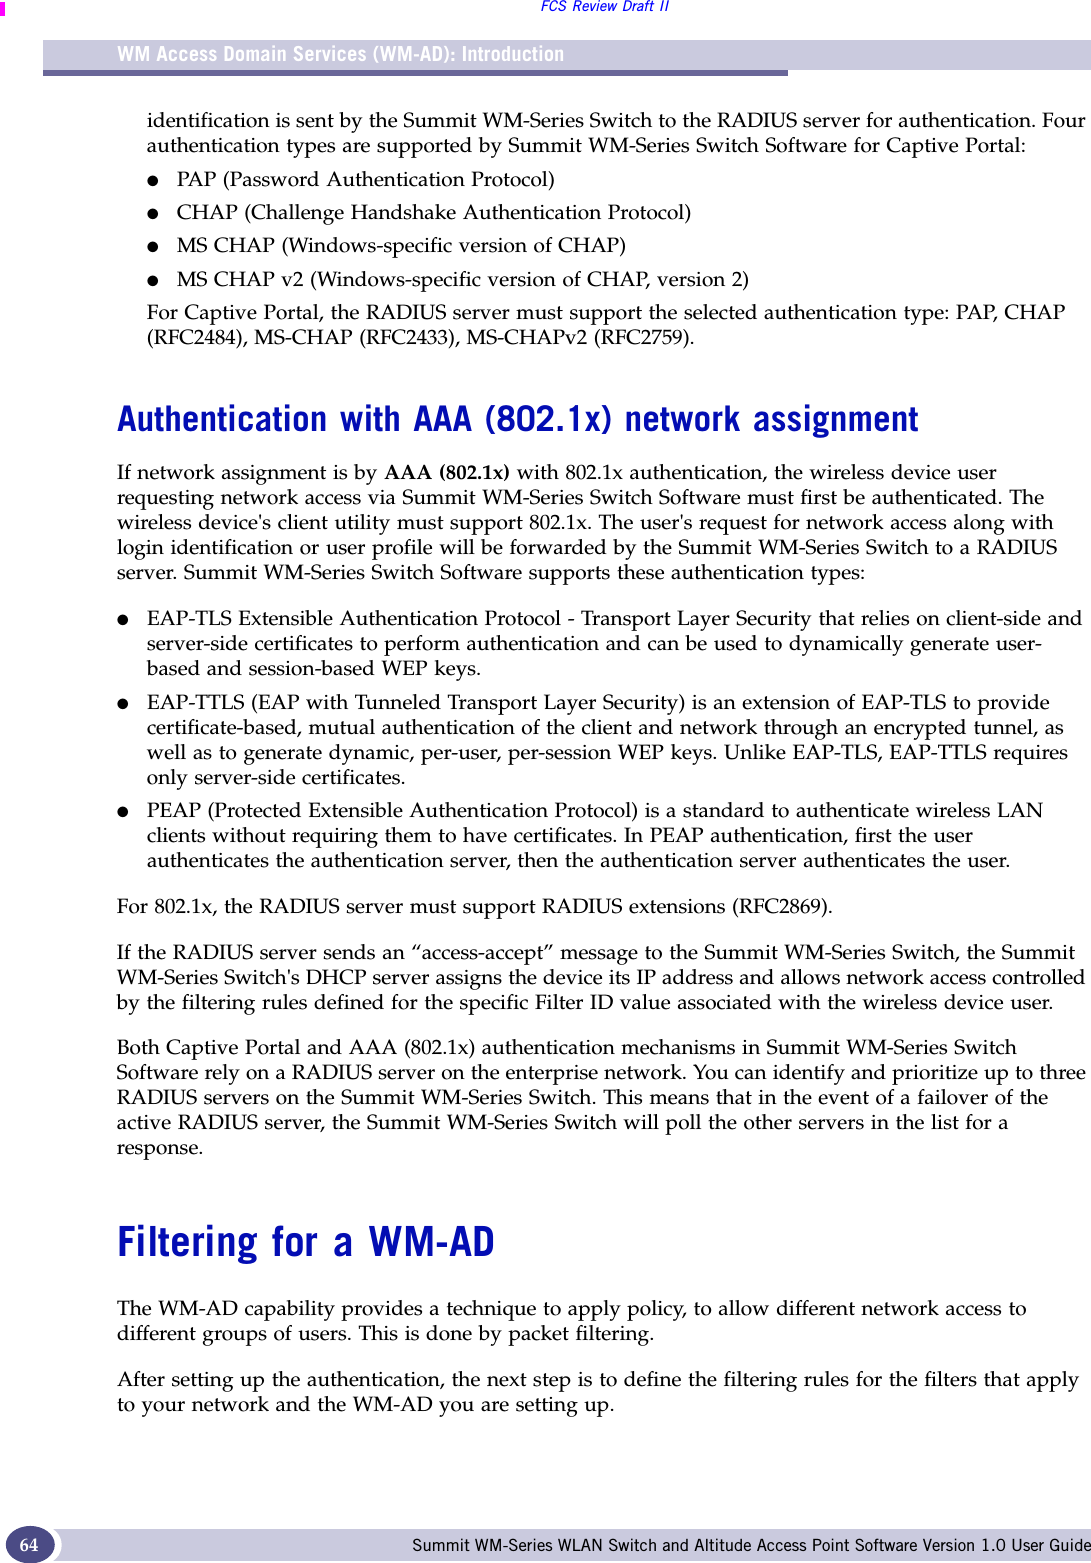 WM Access Domain Services (WM-AD): IntroductionFCS Review Draft IISummit WM-Series WLAN Switch and Altitude Access Point Software Version 1.0 User Guide64identification is sent by the Summit WM-Series Switch to the RADIUS server for authentication. Four authentication types are supported by Summit WM-Series Switch Software for Captive Portal:●PAP (Password Authentication Protocol) ●CHAP (Challenge Handshake Authentication Protocol)●MS CHAP (Windows-specific version of CHAP)●MS CHAP v2 (Windows-specific version of CHAP, version 2)For Captive Portal, the RADIUS server must support the selected authentication type: PAP, CHAP (RFC2484), MS-CHAP (RFC2433), MS-CHAPv2 (RFC2759).Authentication with AAA (802.1x) network assignmentIf network assignment is by AAA (802.1x) with 802.1x authentication, the wireless device user requesting network access via Summit WM-Series Switch Software must first be authenticated. The wireless device&apos;s client utility must support 802.1x. The user&apos;s request for network access along with login identification or user profile will be forwarded by the Summit WM-Series Switch to a RADIUS server. Summit WM-Series Switch Software supports these authentication types:●EAP-TLS Extensible Authentication Protocol - Transport Layer Security that relies on client-side and server-side certificates to perform authentication and can be used to dynamically generate user-based and session-based WEP keys. ●EAP-TTLS (EAP with Tunneled Transport Layer Security) is an extension of EAP-TLS to provide certificate-based, mutual authentication of the client and network through an encrypted tunnel, as well as to generate dynamic, per-user, per-session WEP keys. Unlike EAP-TLS, EAP-TTLS requires only server-side certificates. ●PEAP (Protected Extensible Authentication Protocol) is a standard to authenticate wireless LAN clients without requiring them to have certificates. In PEAP authentication, first the user authenticates the authentication server, then the authentication server authenticates the user.For 802.1x, the RADIUS server must support RADIUS extensions (RFC2869).If the RADIUS server sends an “access-accept” message to the Summit WM-Series Switch, the Summit WM-Series Switch&apos;s DHCP server assigns the device its IP address and allows network access controlled by the filtering rules defined for the specific Filter ID value associated with the wireless device user.Both Captive Portal and AAA (802.1x) authentication mechanisms in Summit WM-Series Switch Software rely on a RADIUS server on the enterprise network. You can identify and prioritize up to three RADIUS servers on the Summit WM-Series Switch. This means that in the event of a failover of the active RADIUS server, the Summit WM-Series Switch will poll the other servers in the list for a response. Filtering for a WM-ADThe WM-AD capability provides a technique to apply policy, to allow different network access to different groups of users. This is done by packet filtering.After setting up the authentication, the next step is to define the filtering rules for the filters that apply to your network and the WM-AD you are setting up. 